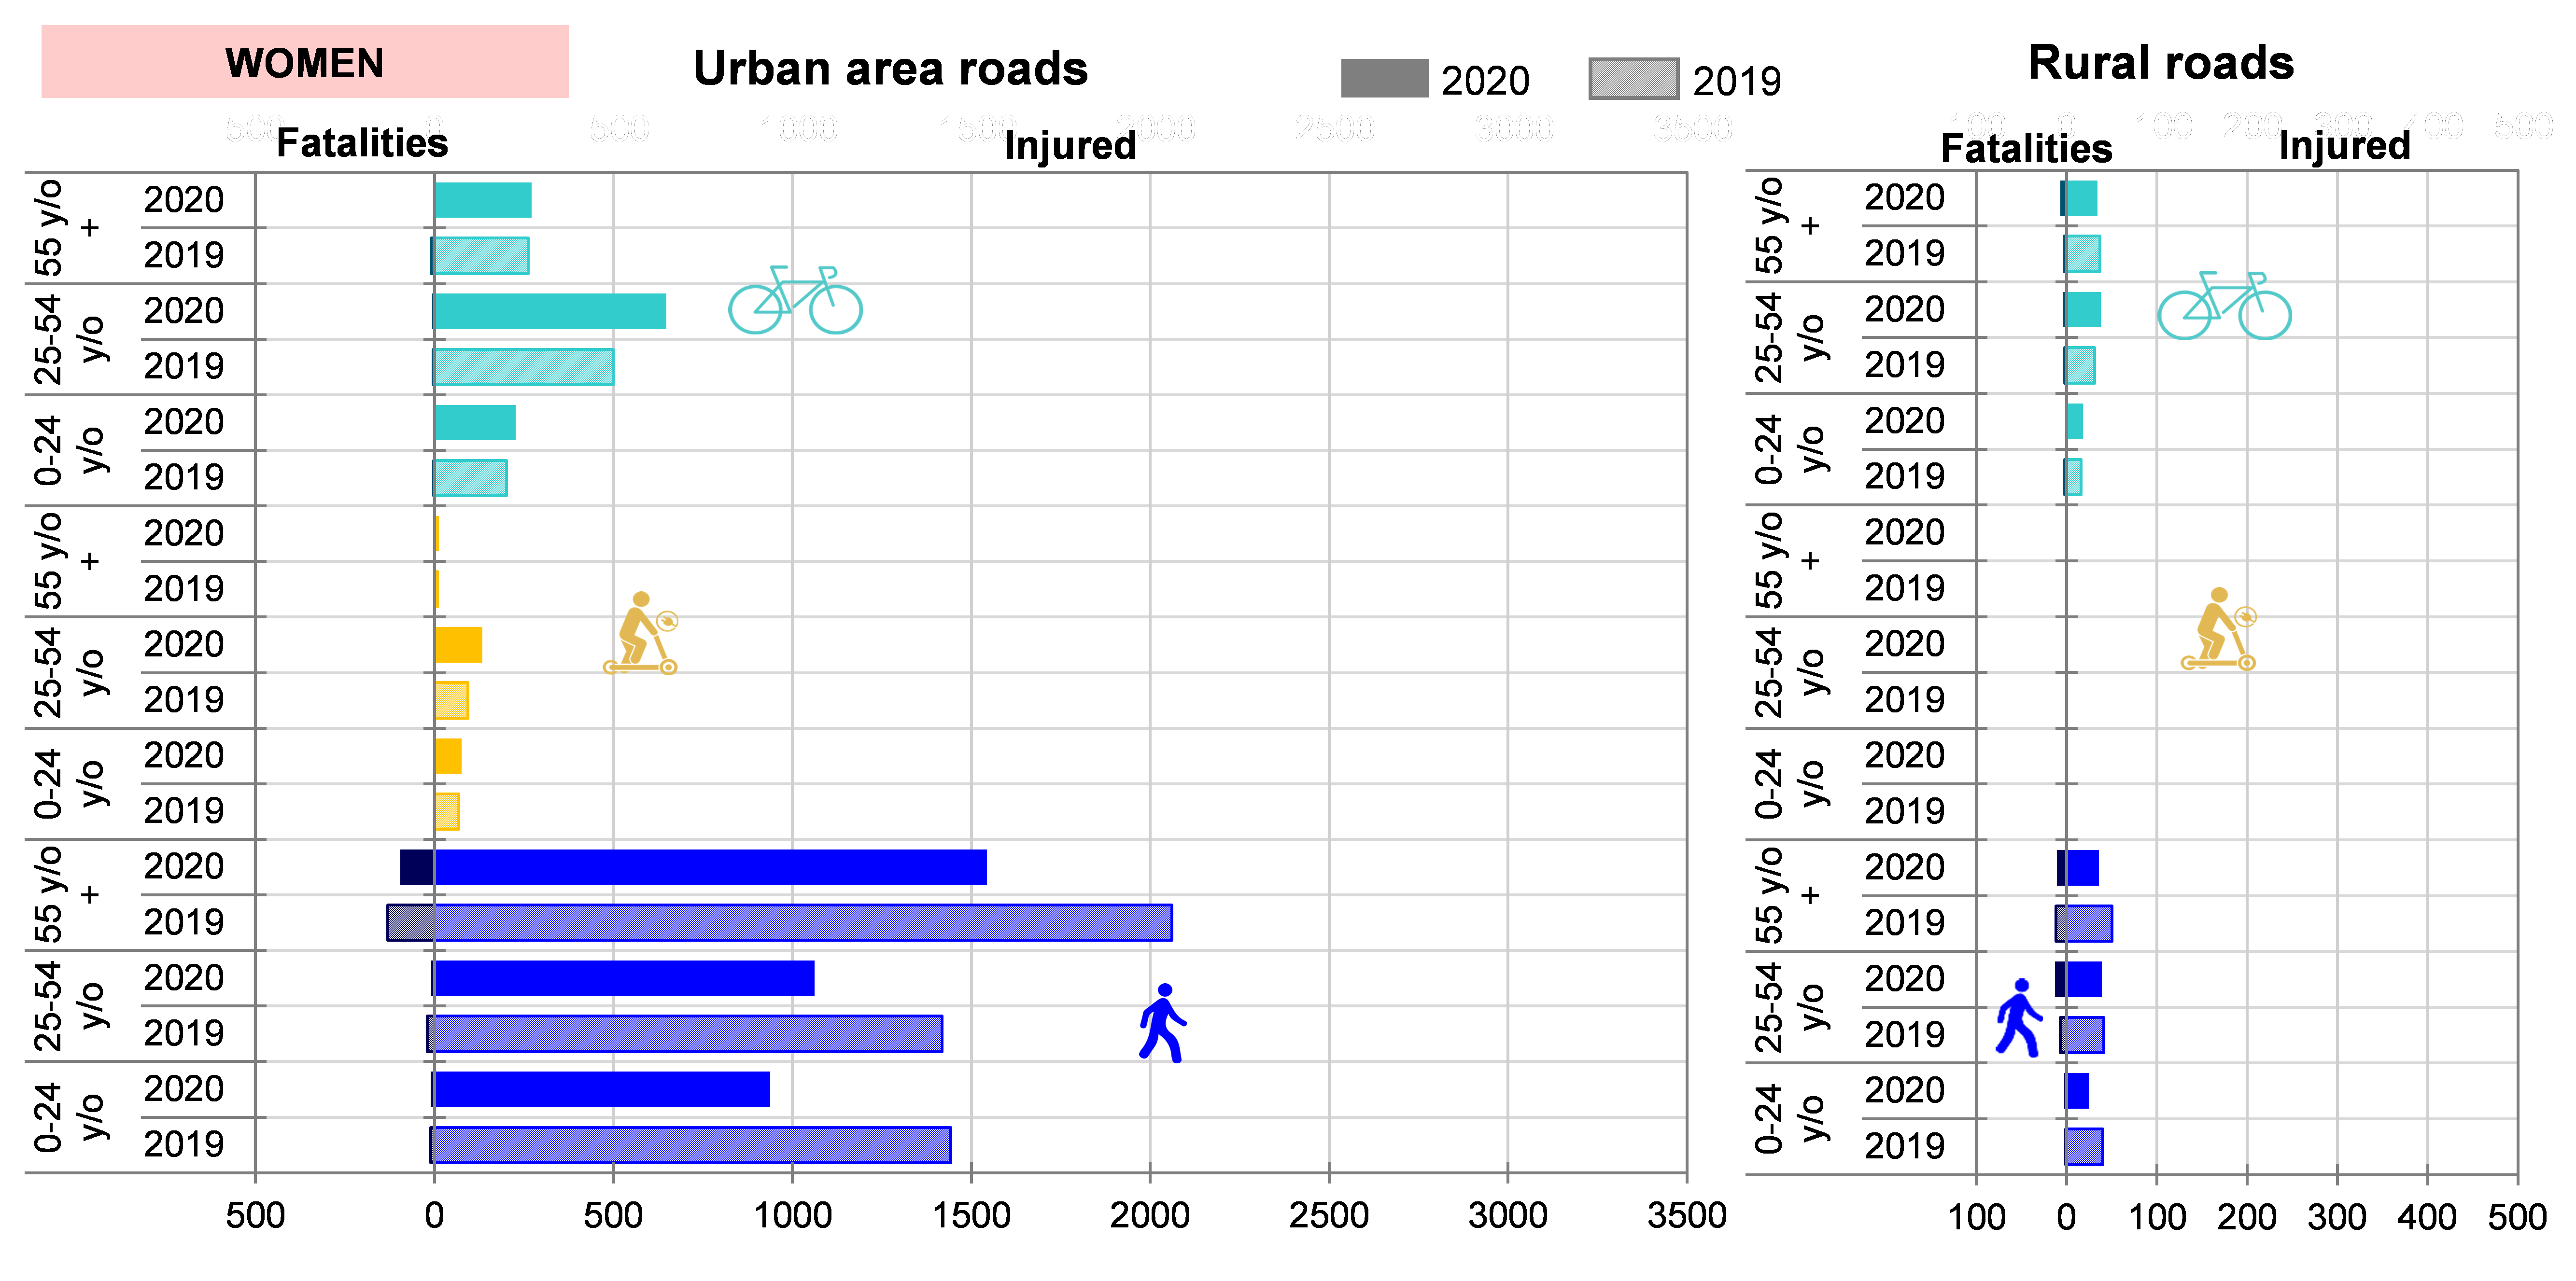 2019-2020 Female victims on active modes